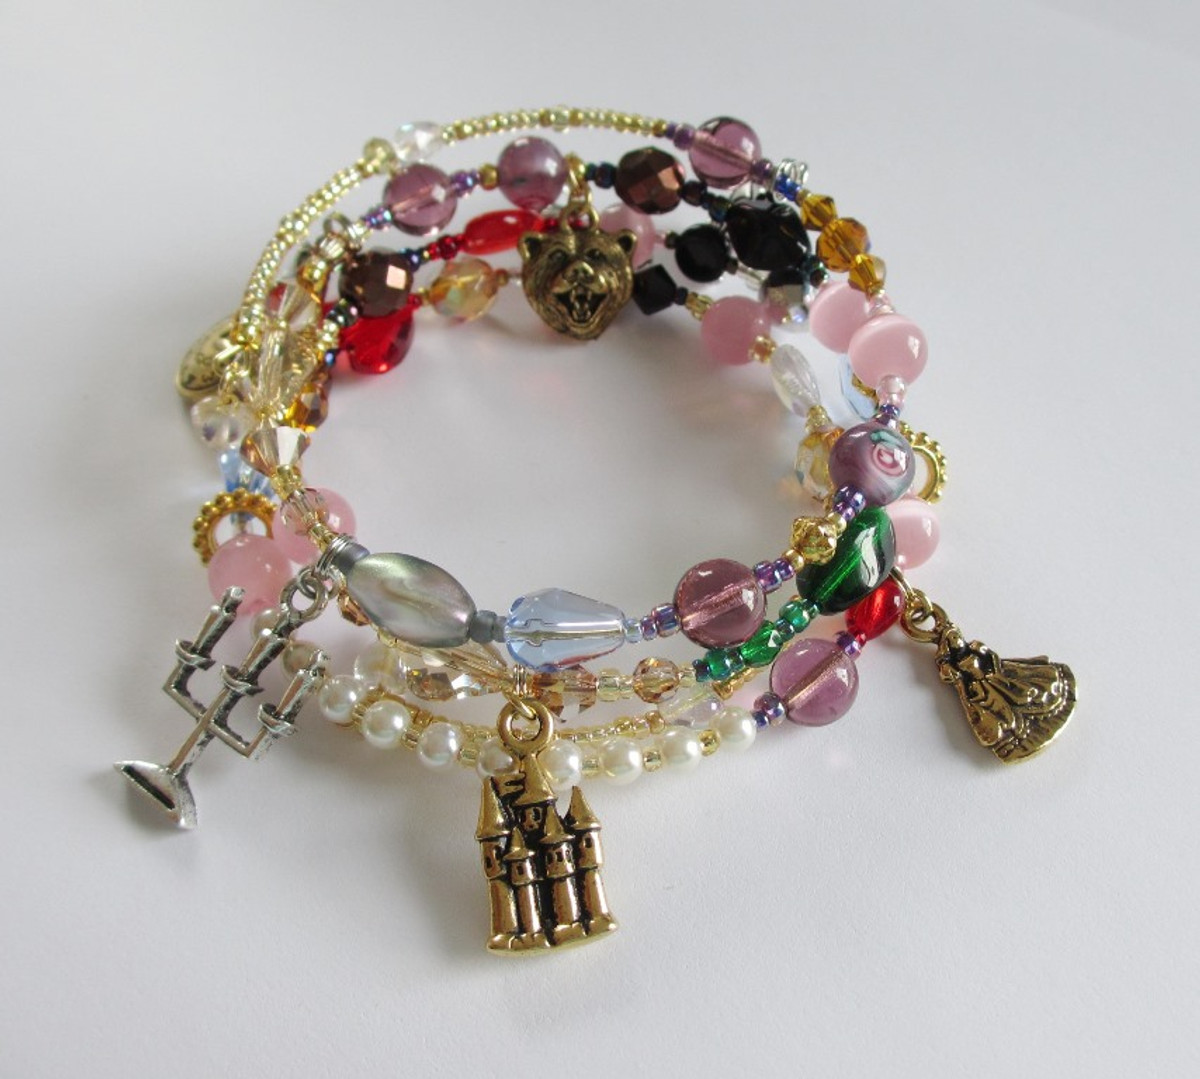 Chunky Charm Bracelet with Glass Beads and Charms